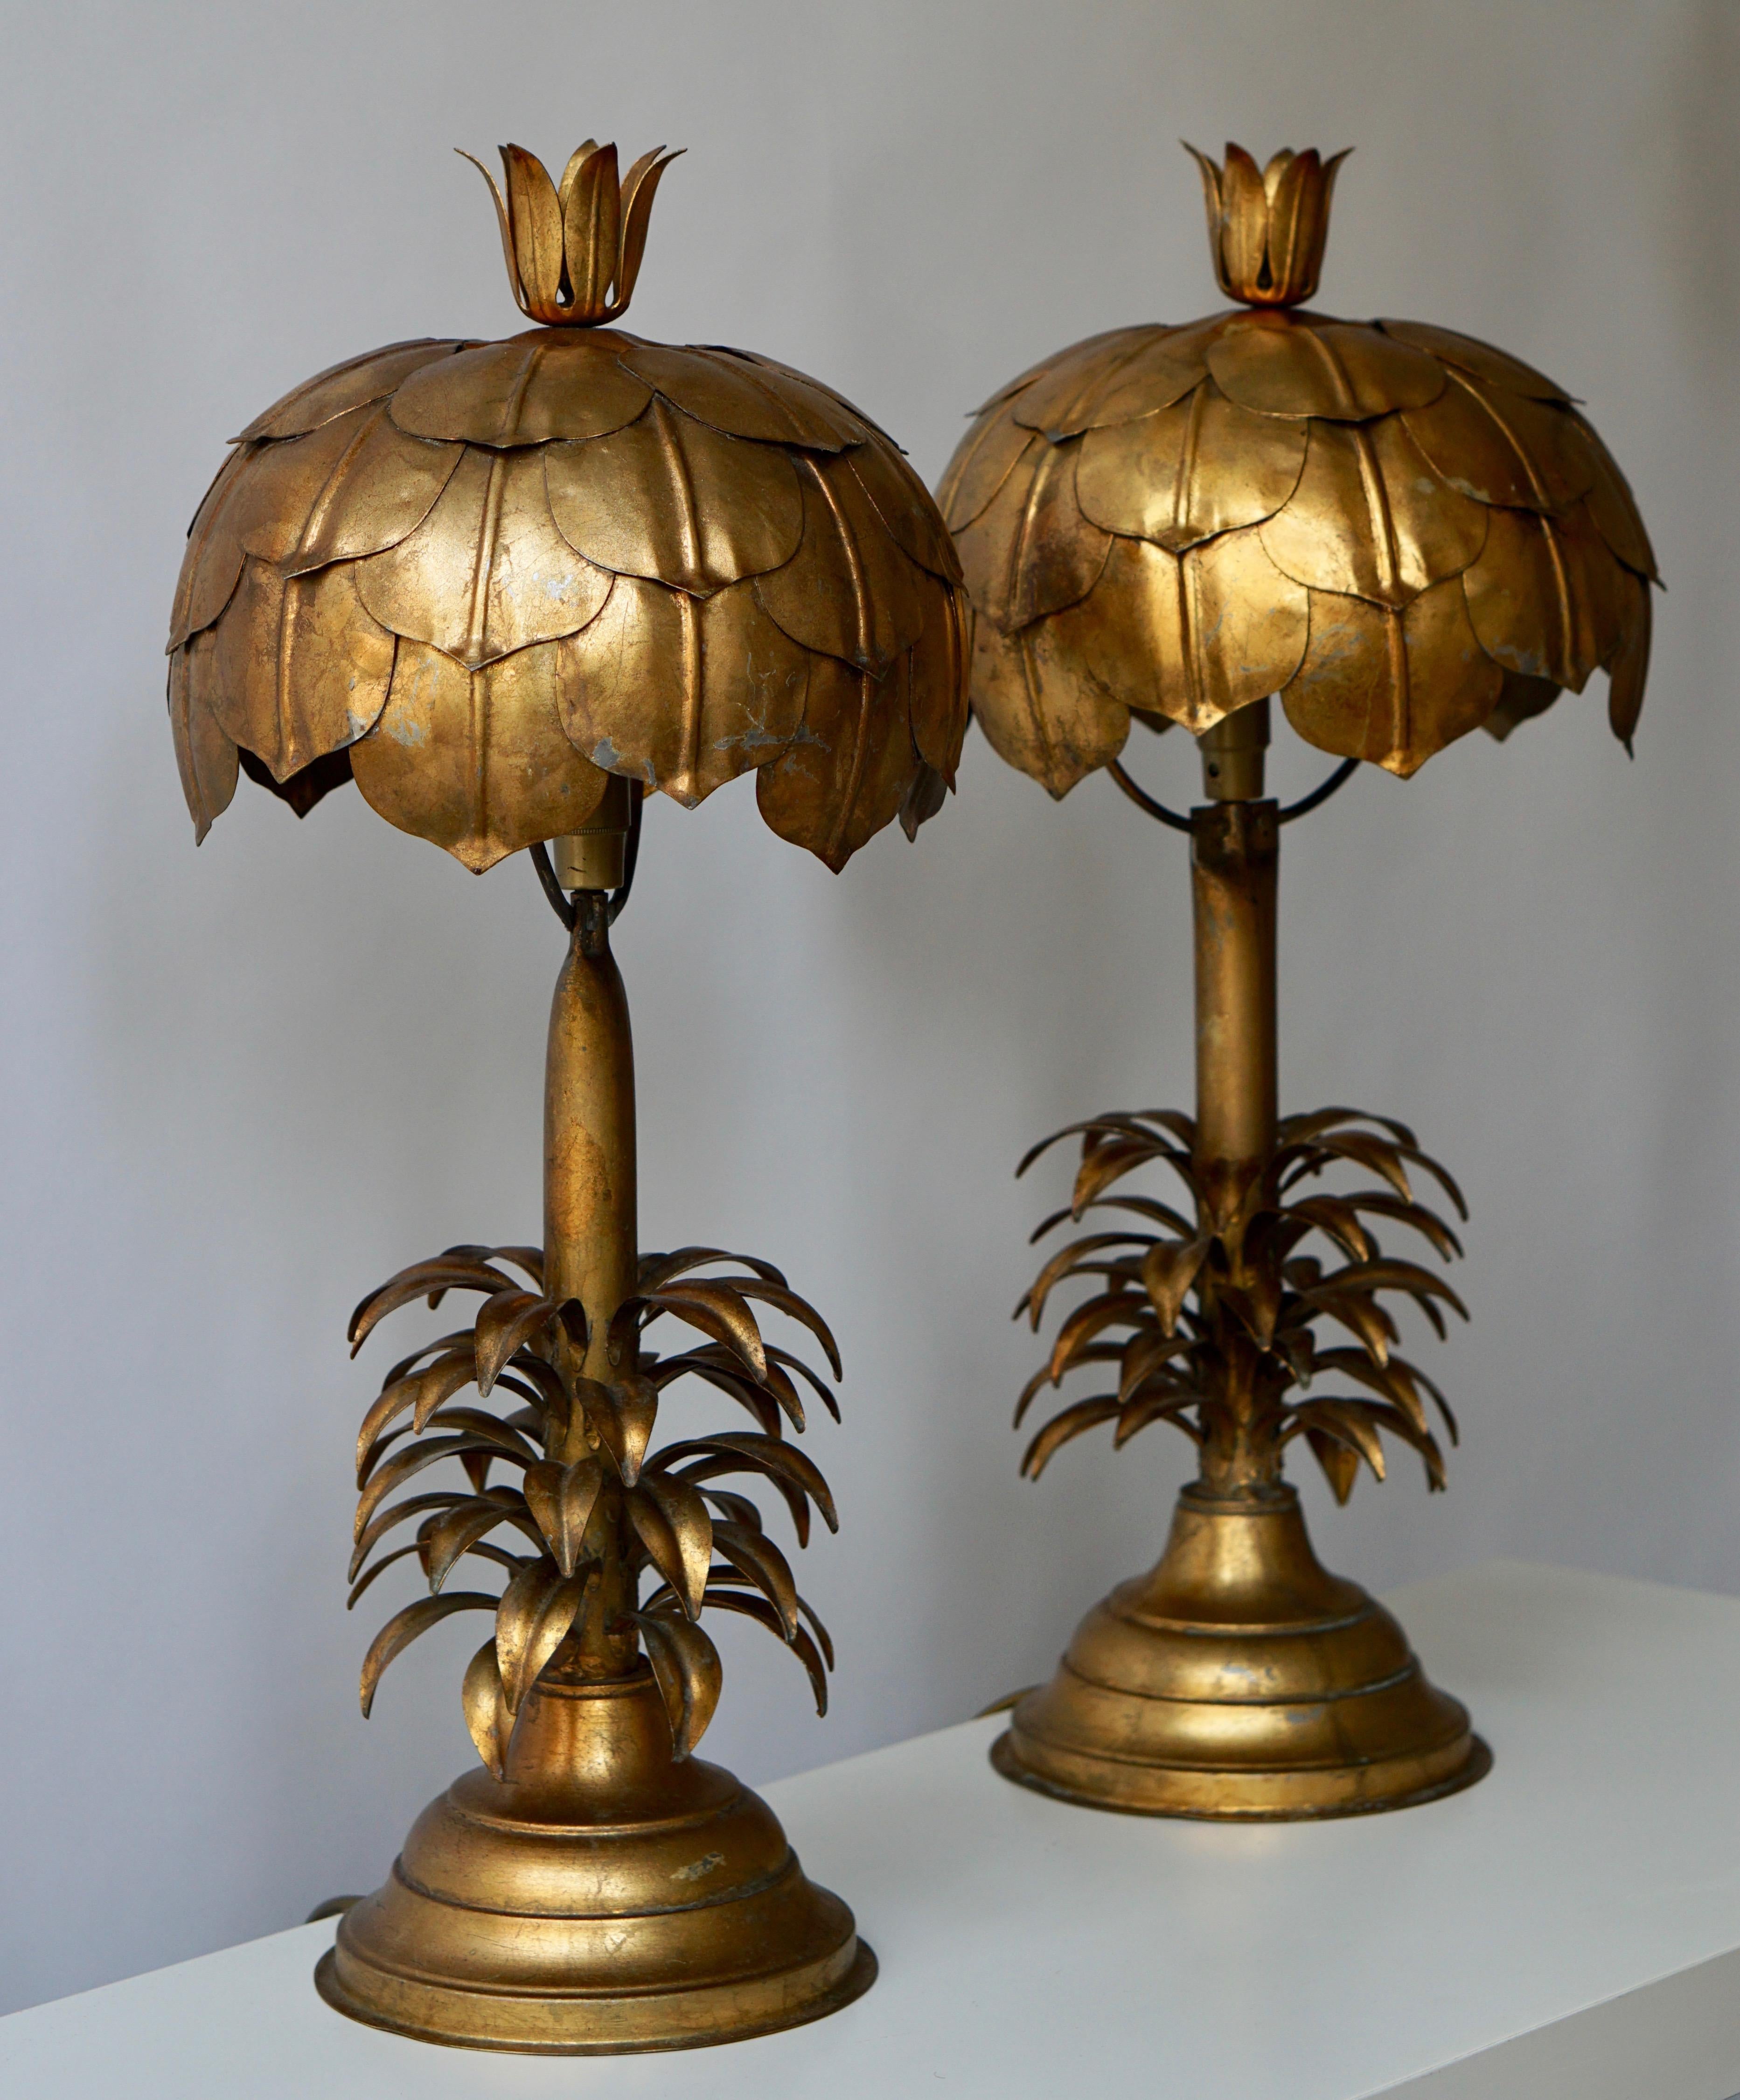 Two stunning gilt metal palm tree lamps, circa 1970s.
A few of the leaves have slight bends at points, some of the gilt shows signs of wear which is consistent with its age.
Please note that price is per item not for the set.
Measures:
Height 59